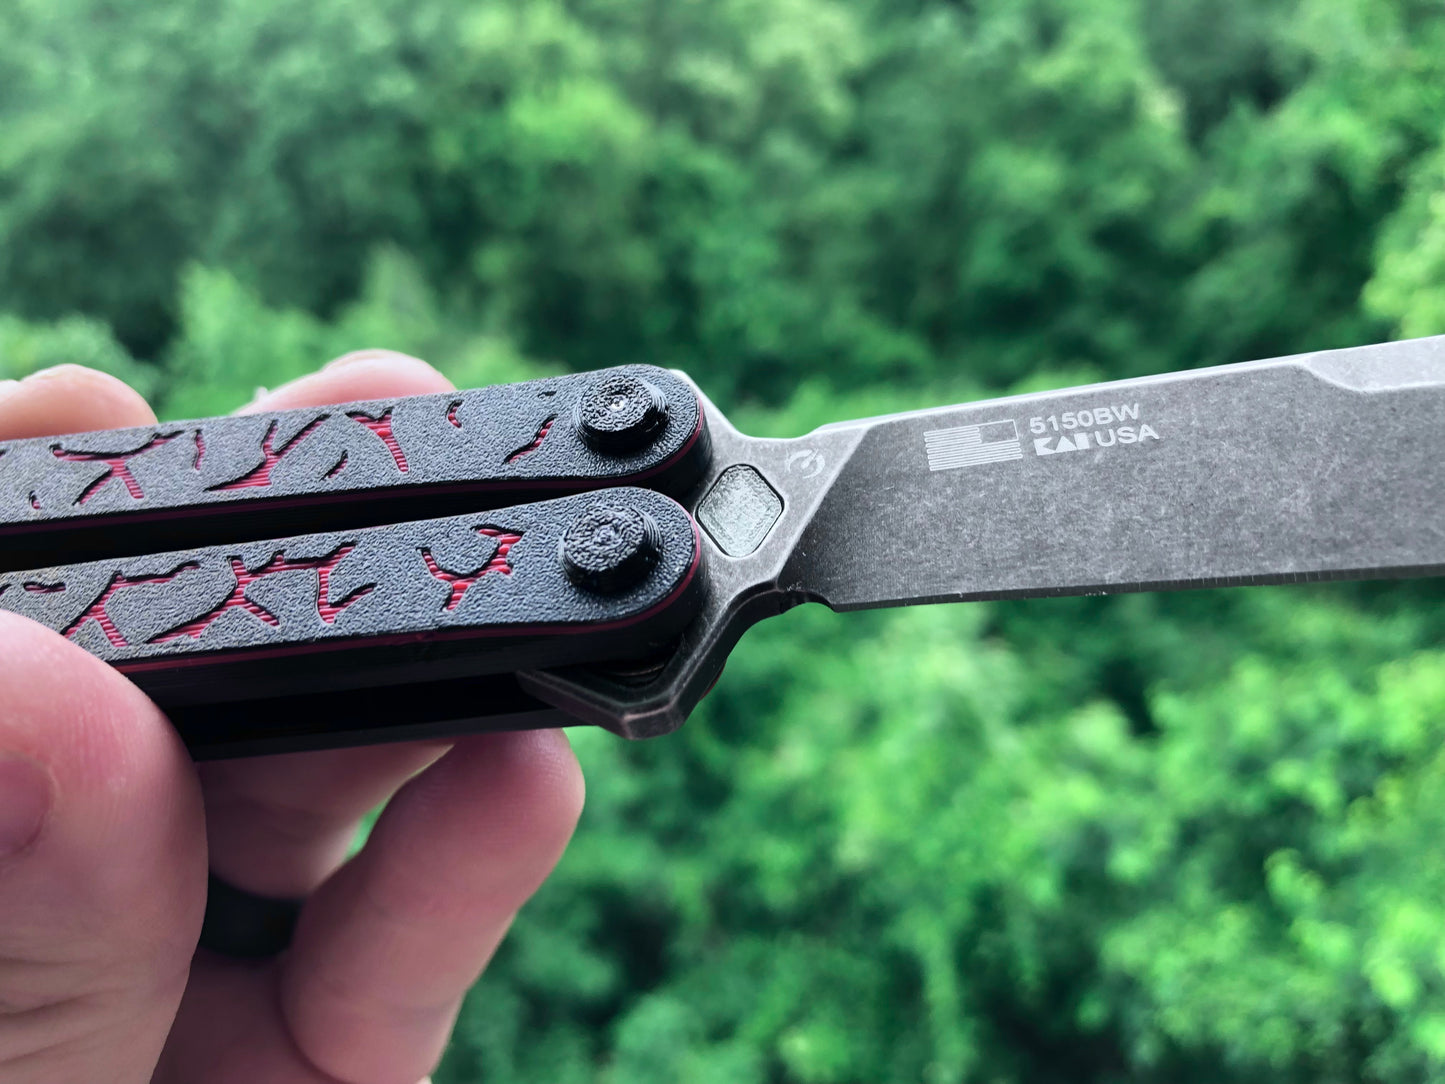 Improve the balance of your Kershaw Lucha balisong for flipping with Zippy mods: extension spacers with Jimping for the Kershaw Lucha and Flytanium Lucha, and the ZippyLucha handle mod with the high-performance Zippy bearing system.